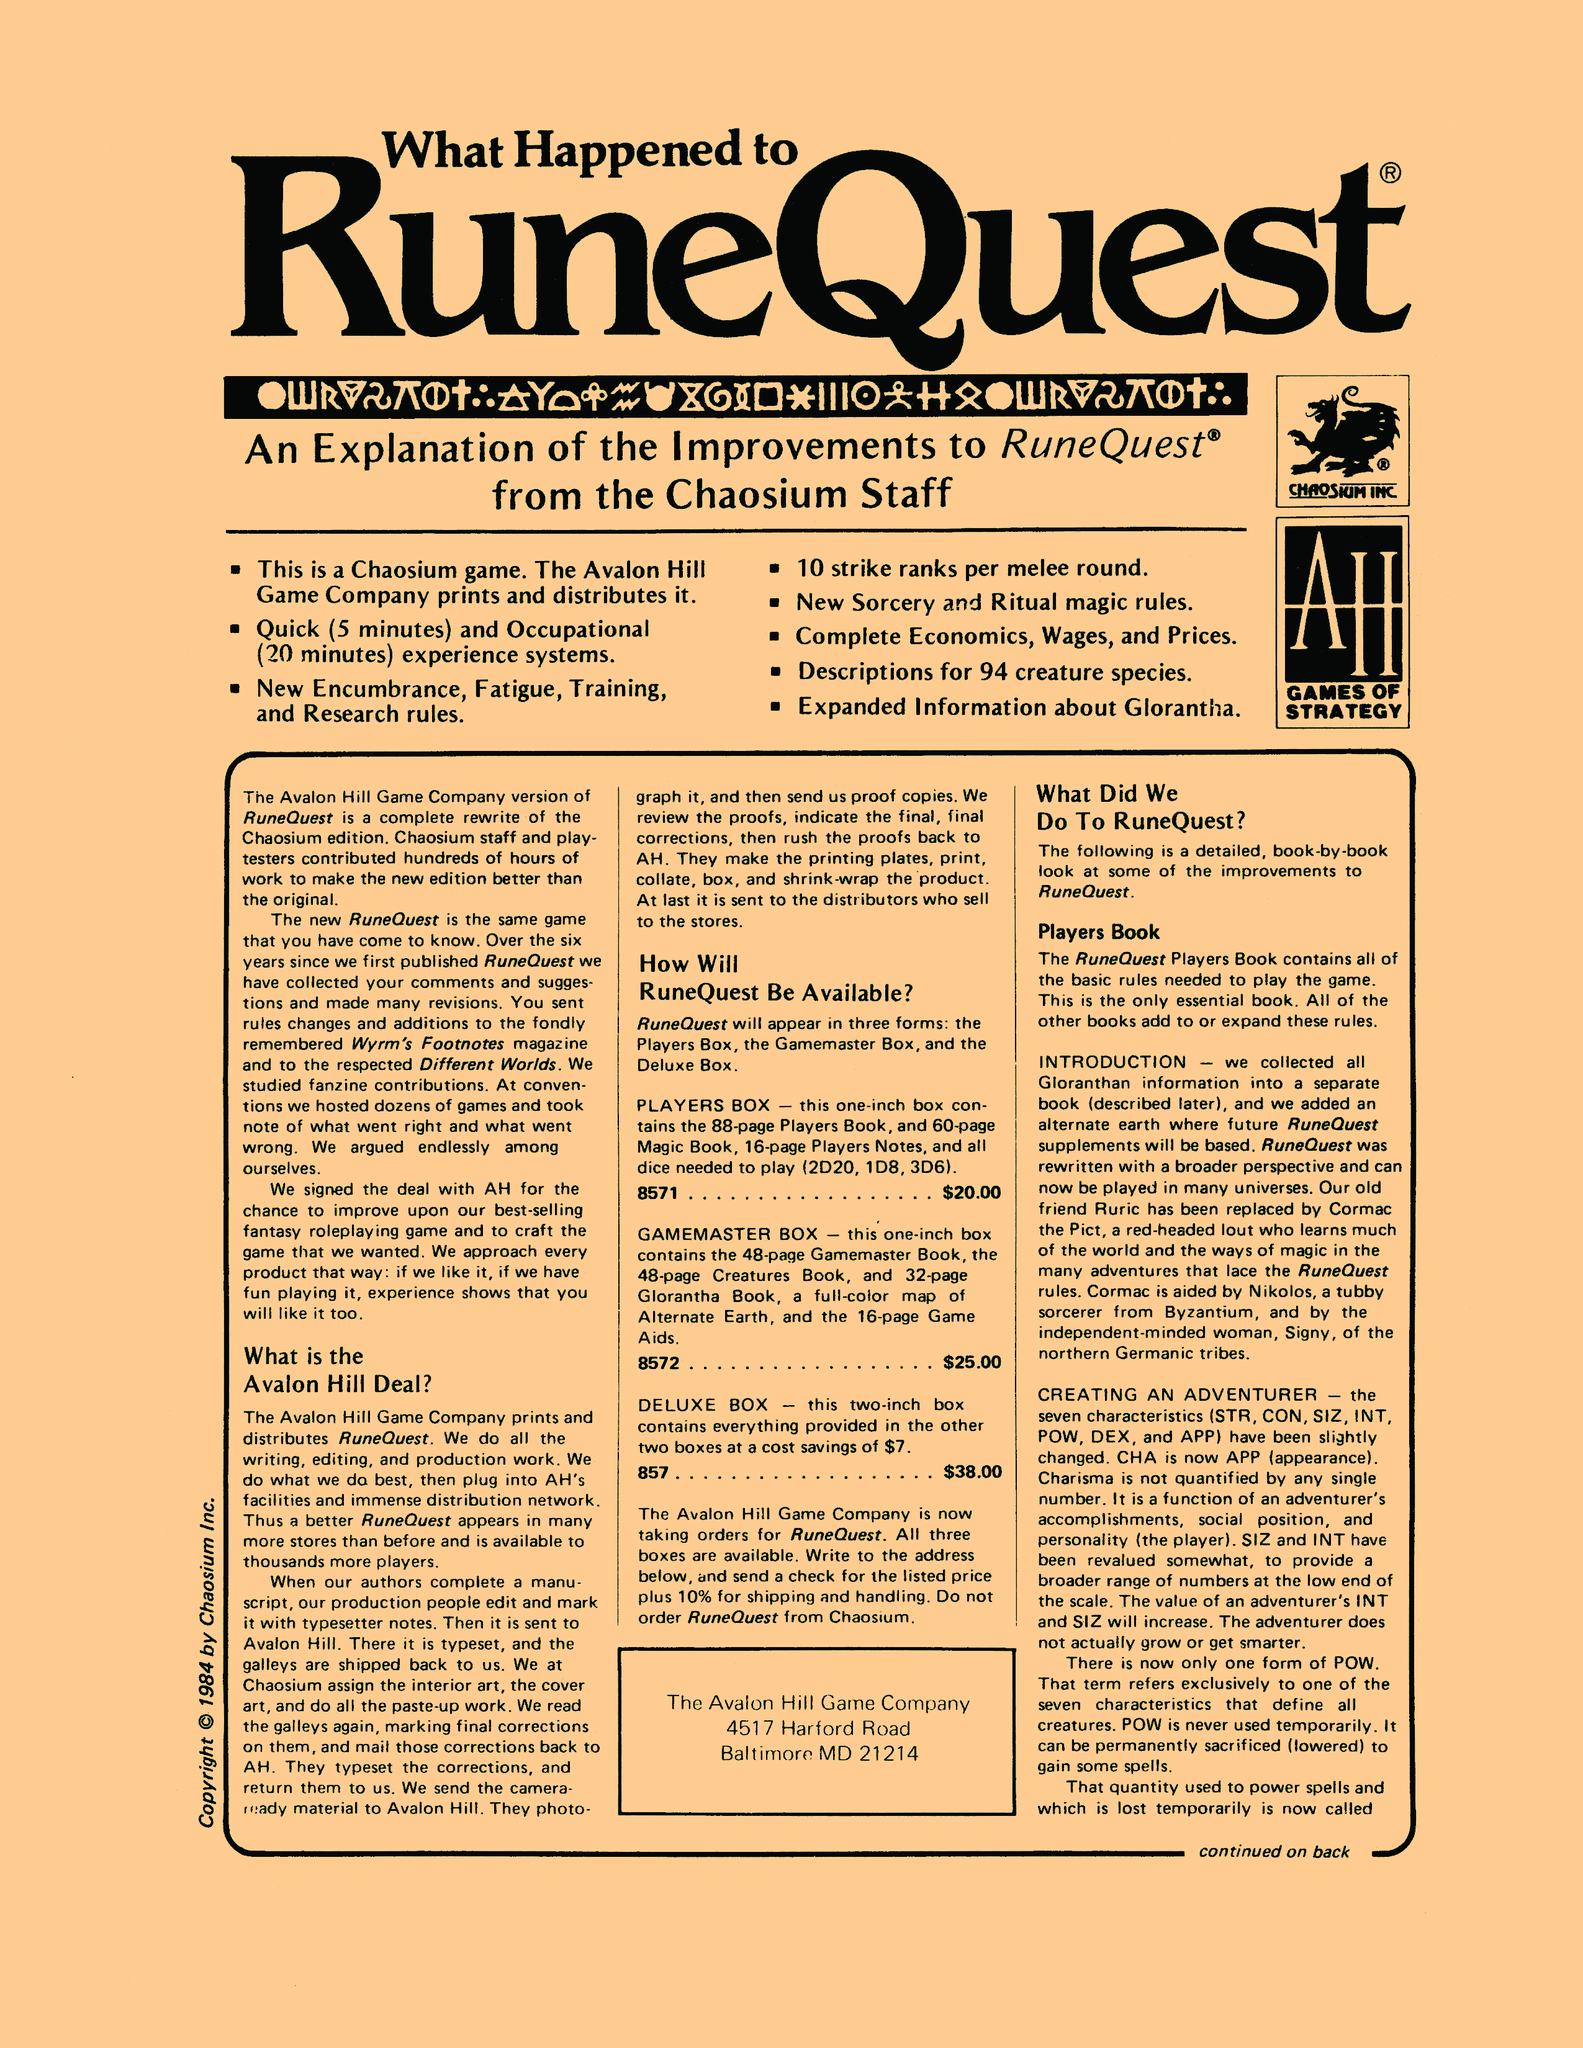 What Happened to RuneQuest flyer